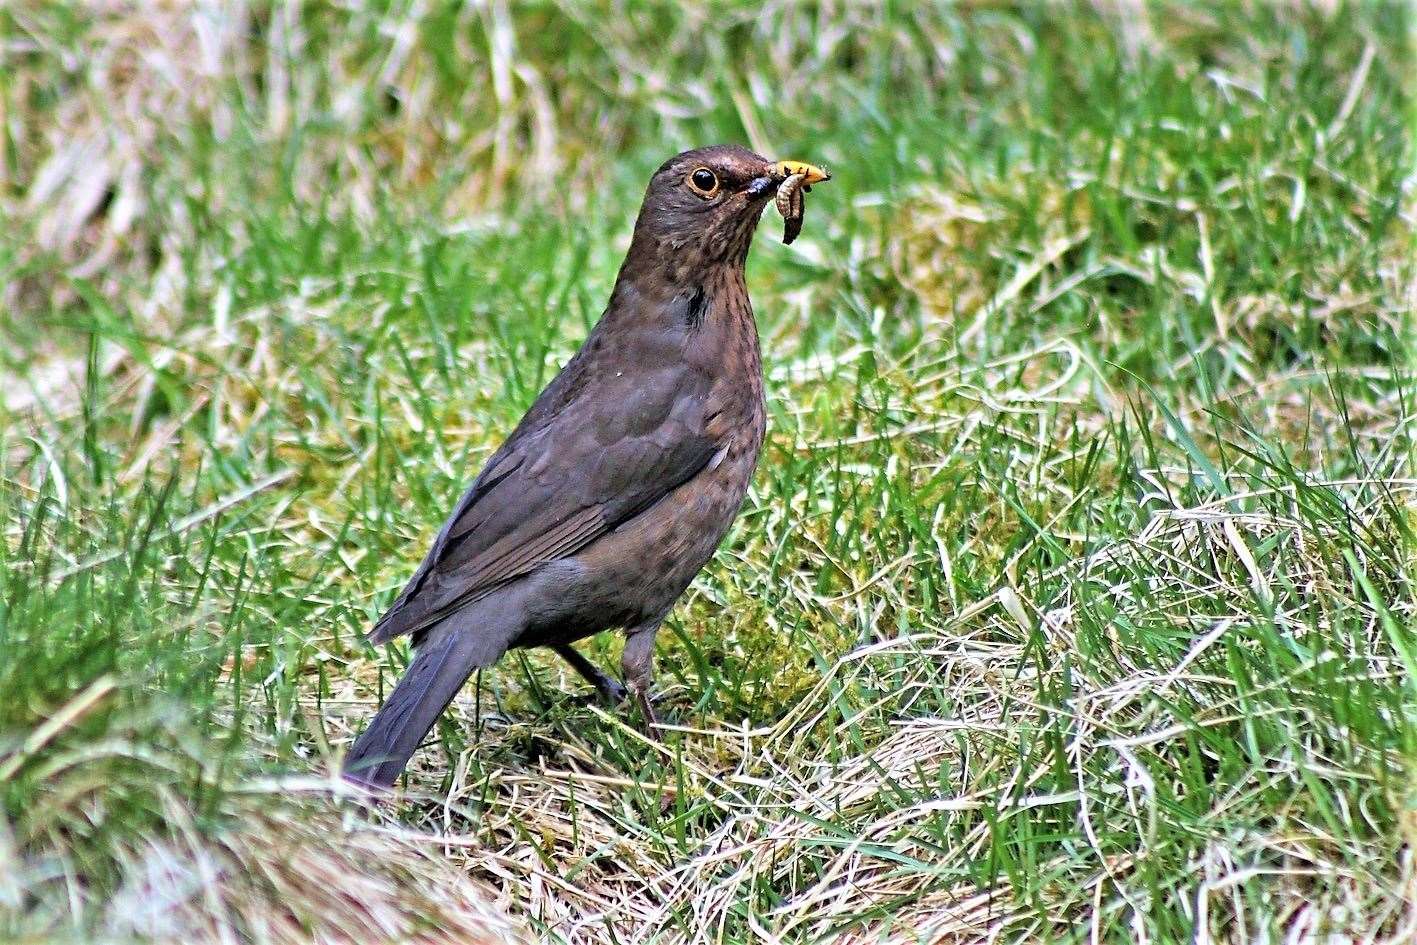 Blackbirds were the most common sightings.